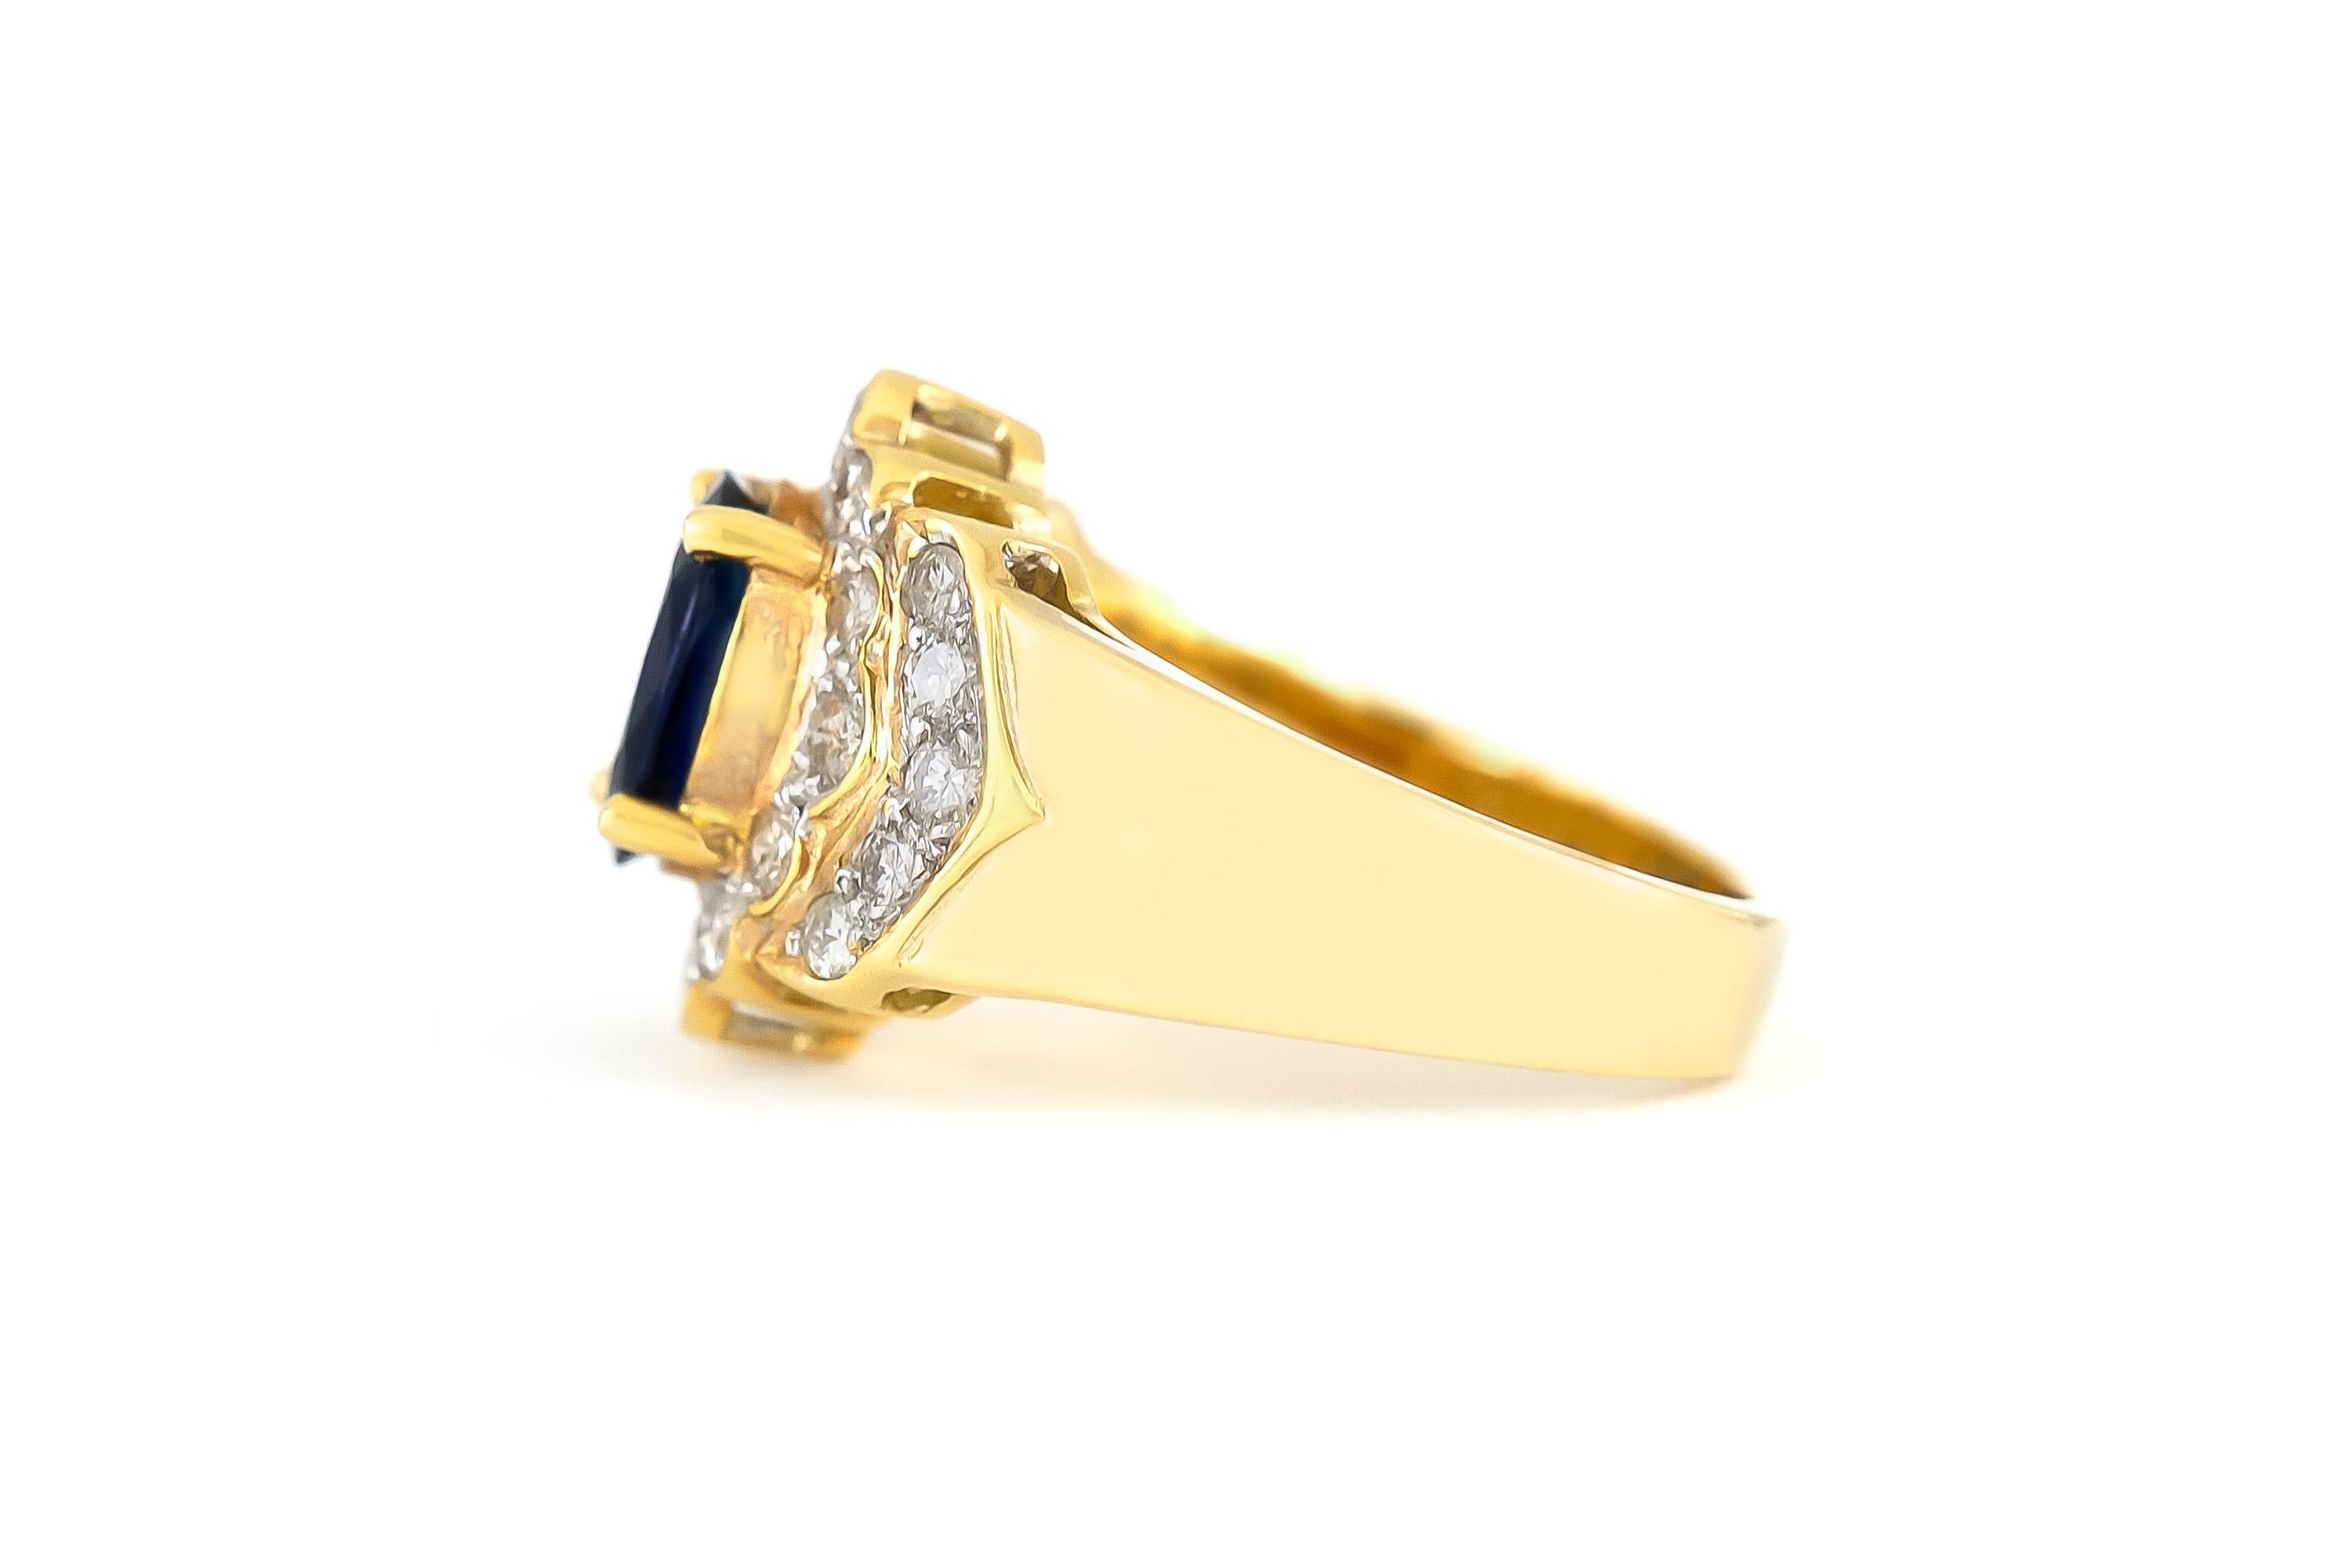 The ring is finely crafted in 14k yellow gold with center sapphire weighing approximately total of 1.94 carat and diamonds weighing approximately total of 0.64 carat.
Circa 1970.